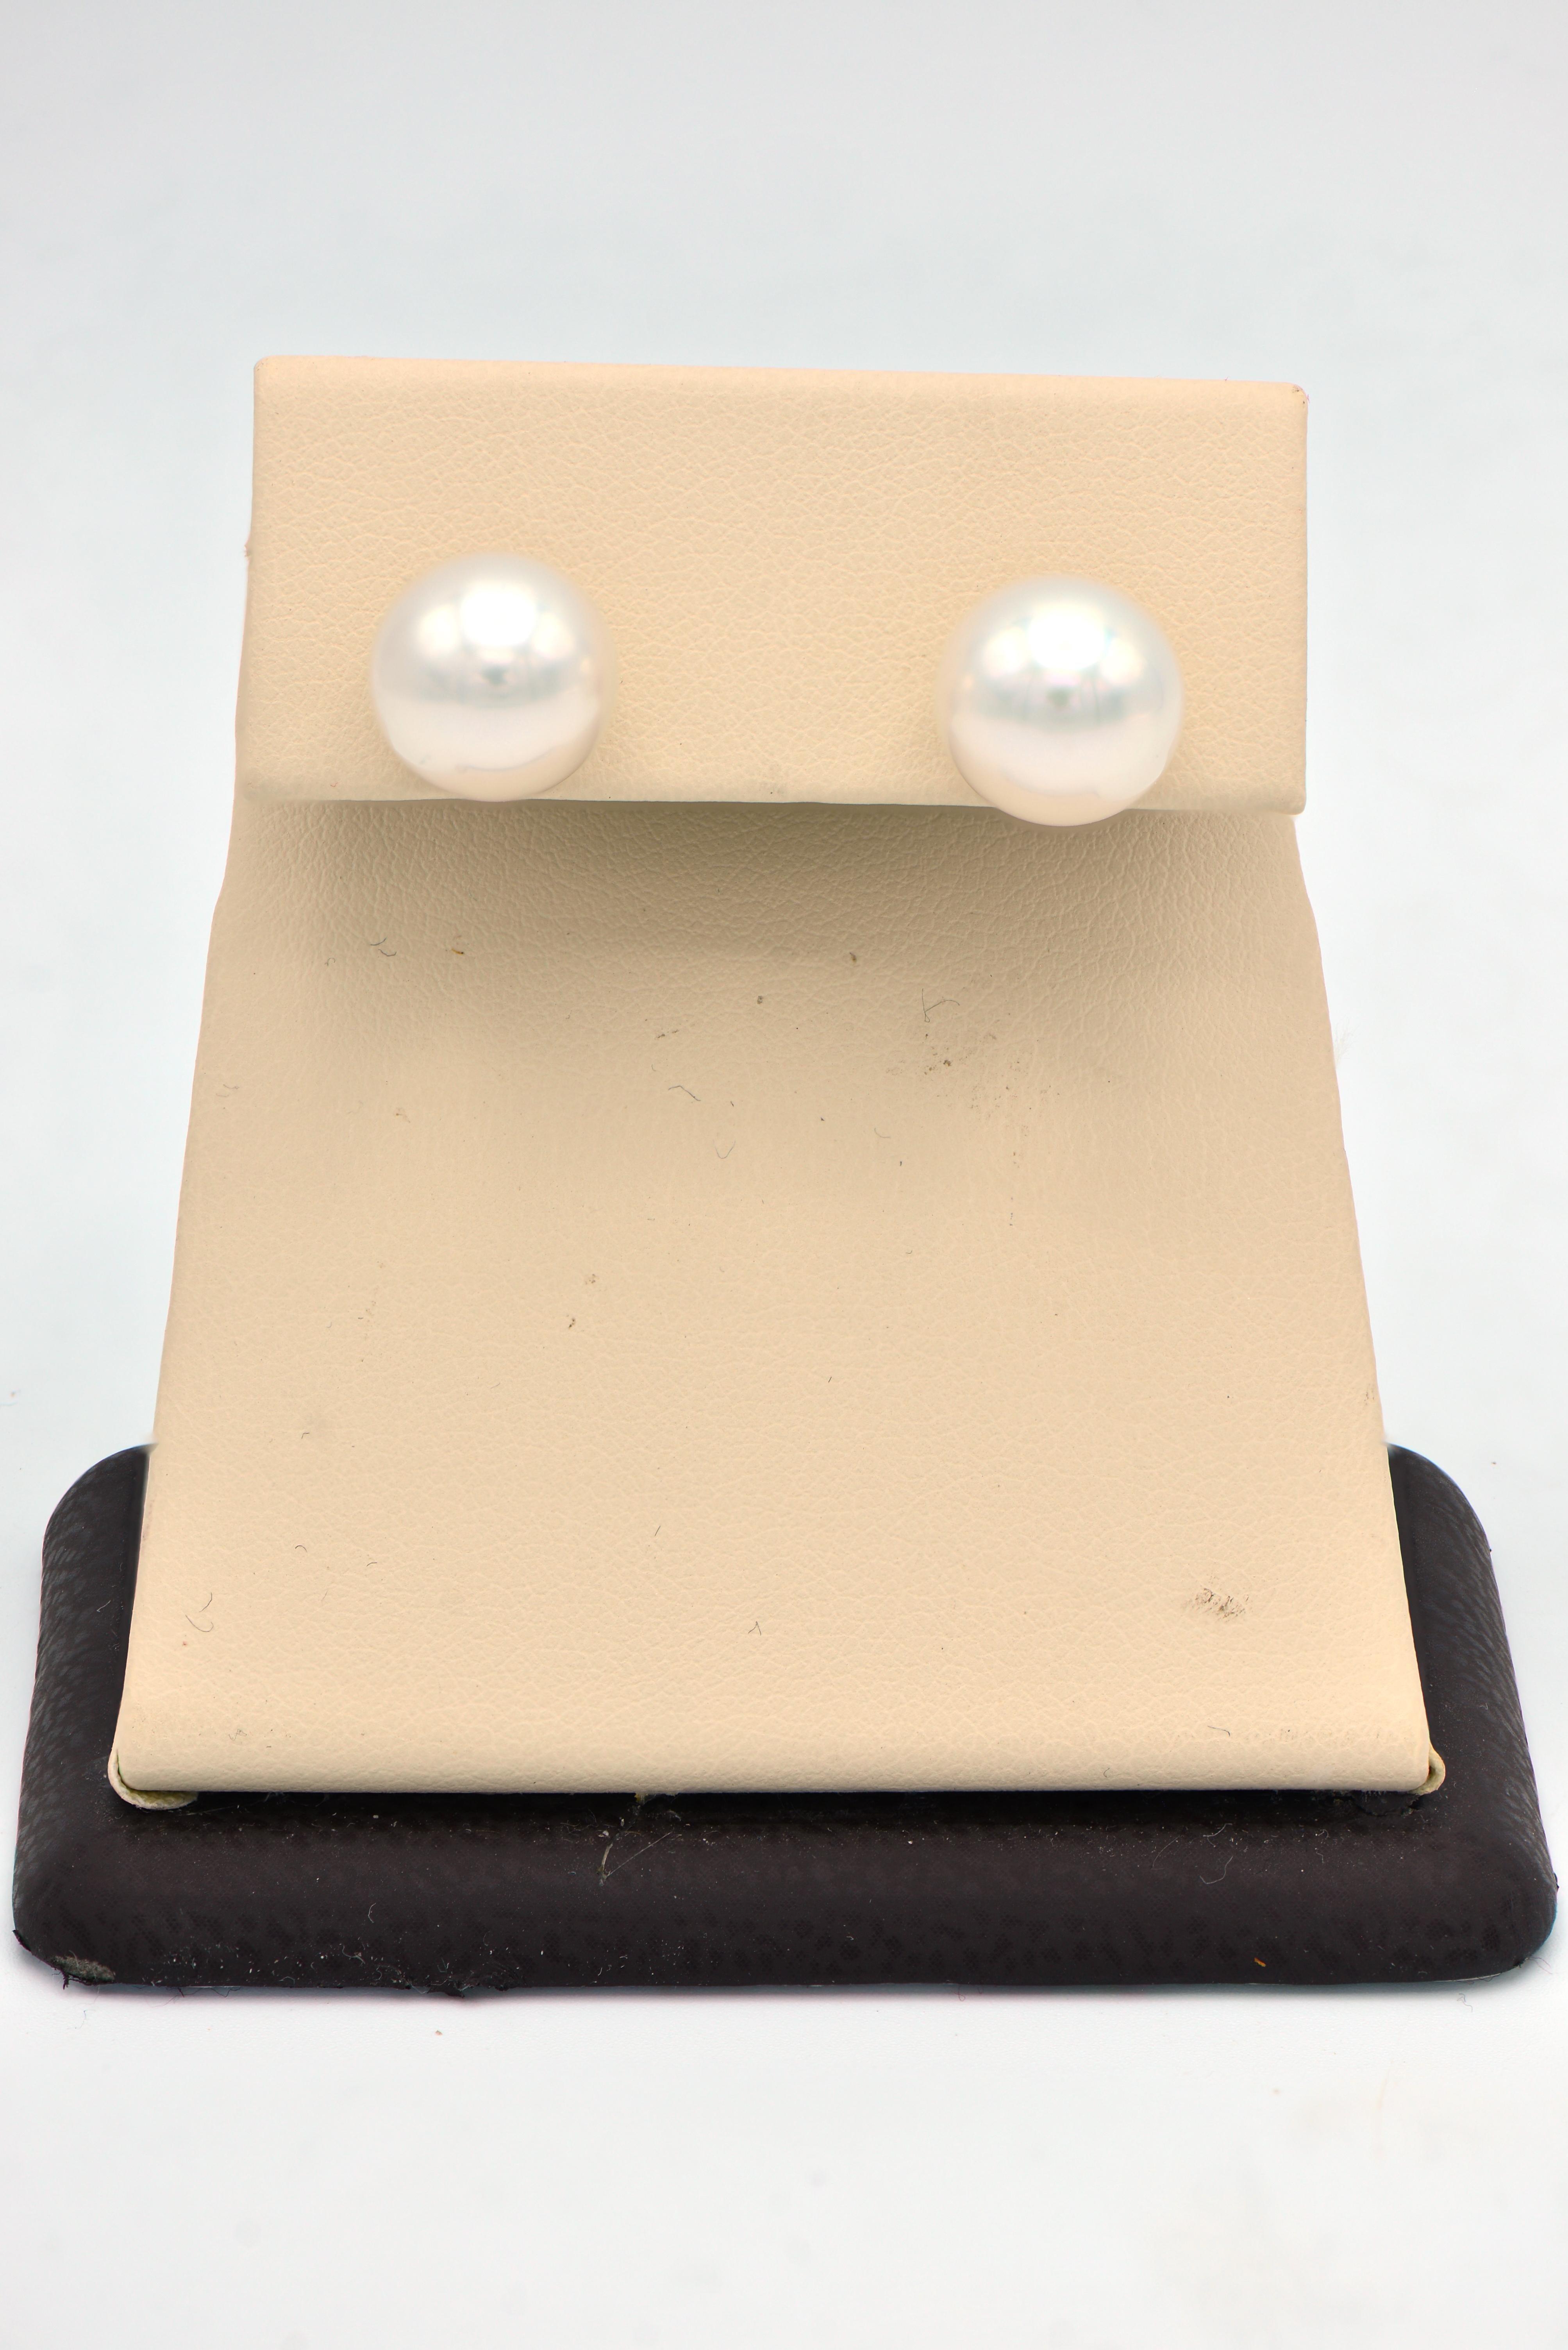 Round Cut 9.5-10mm South Sea Pearl Stud Earrings with 14 Karat White Gold Post and Back For Sale